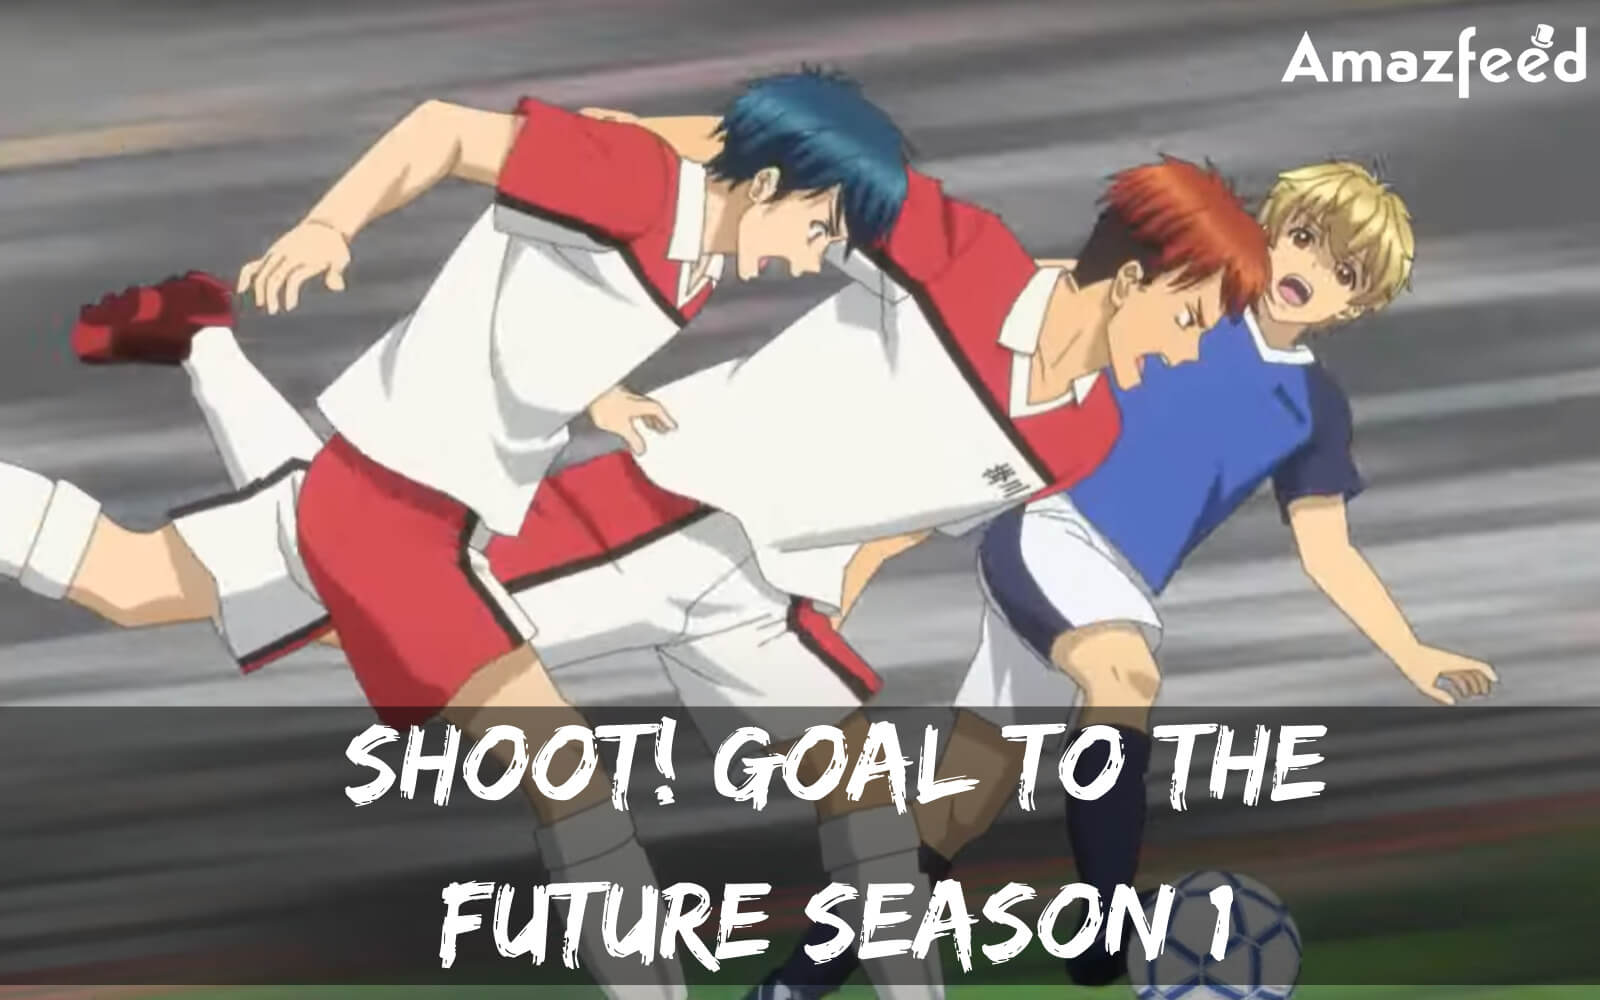 Shoot! Goal to the Future Ep 2: Release Date, Preview